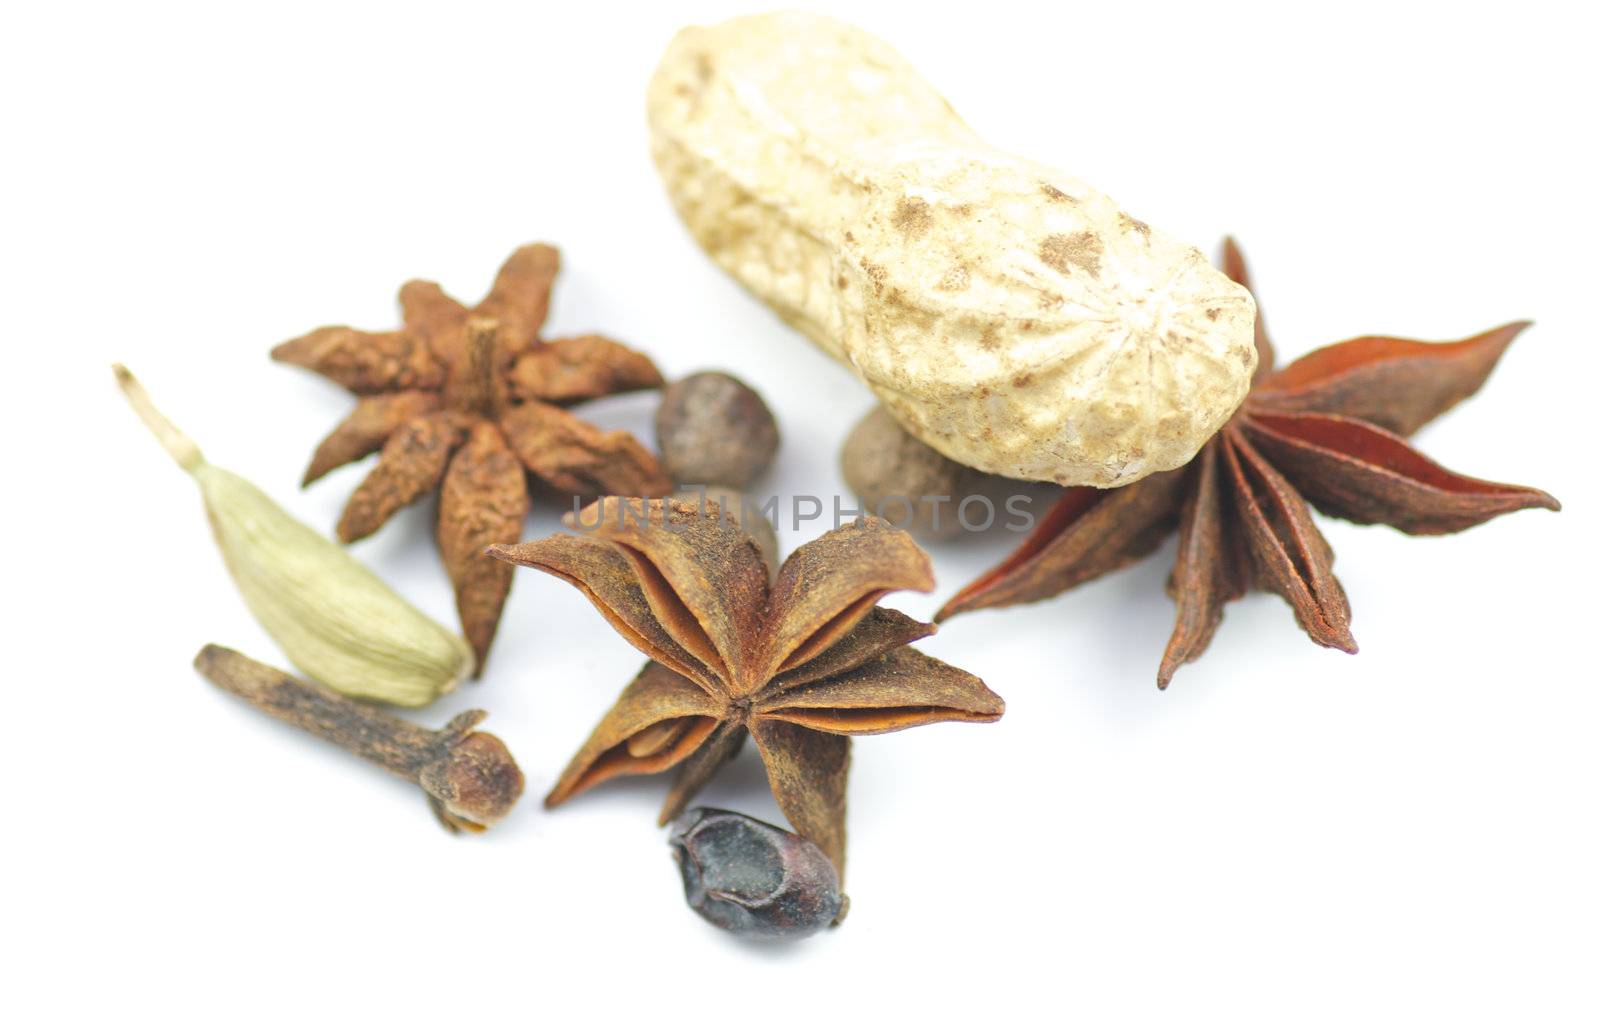 Anise, cardamon and nuts by zhekos